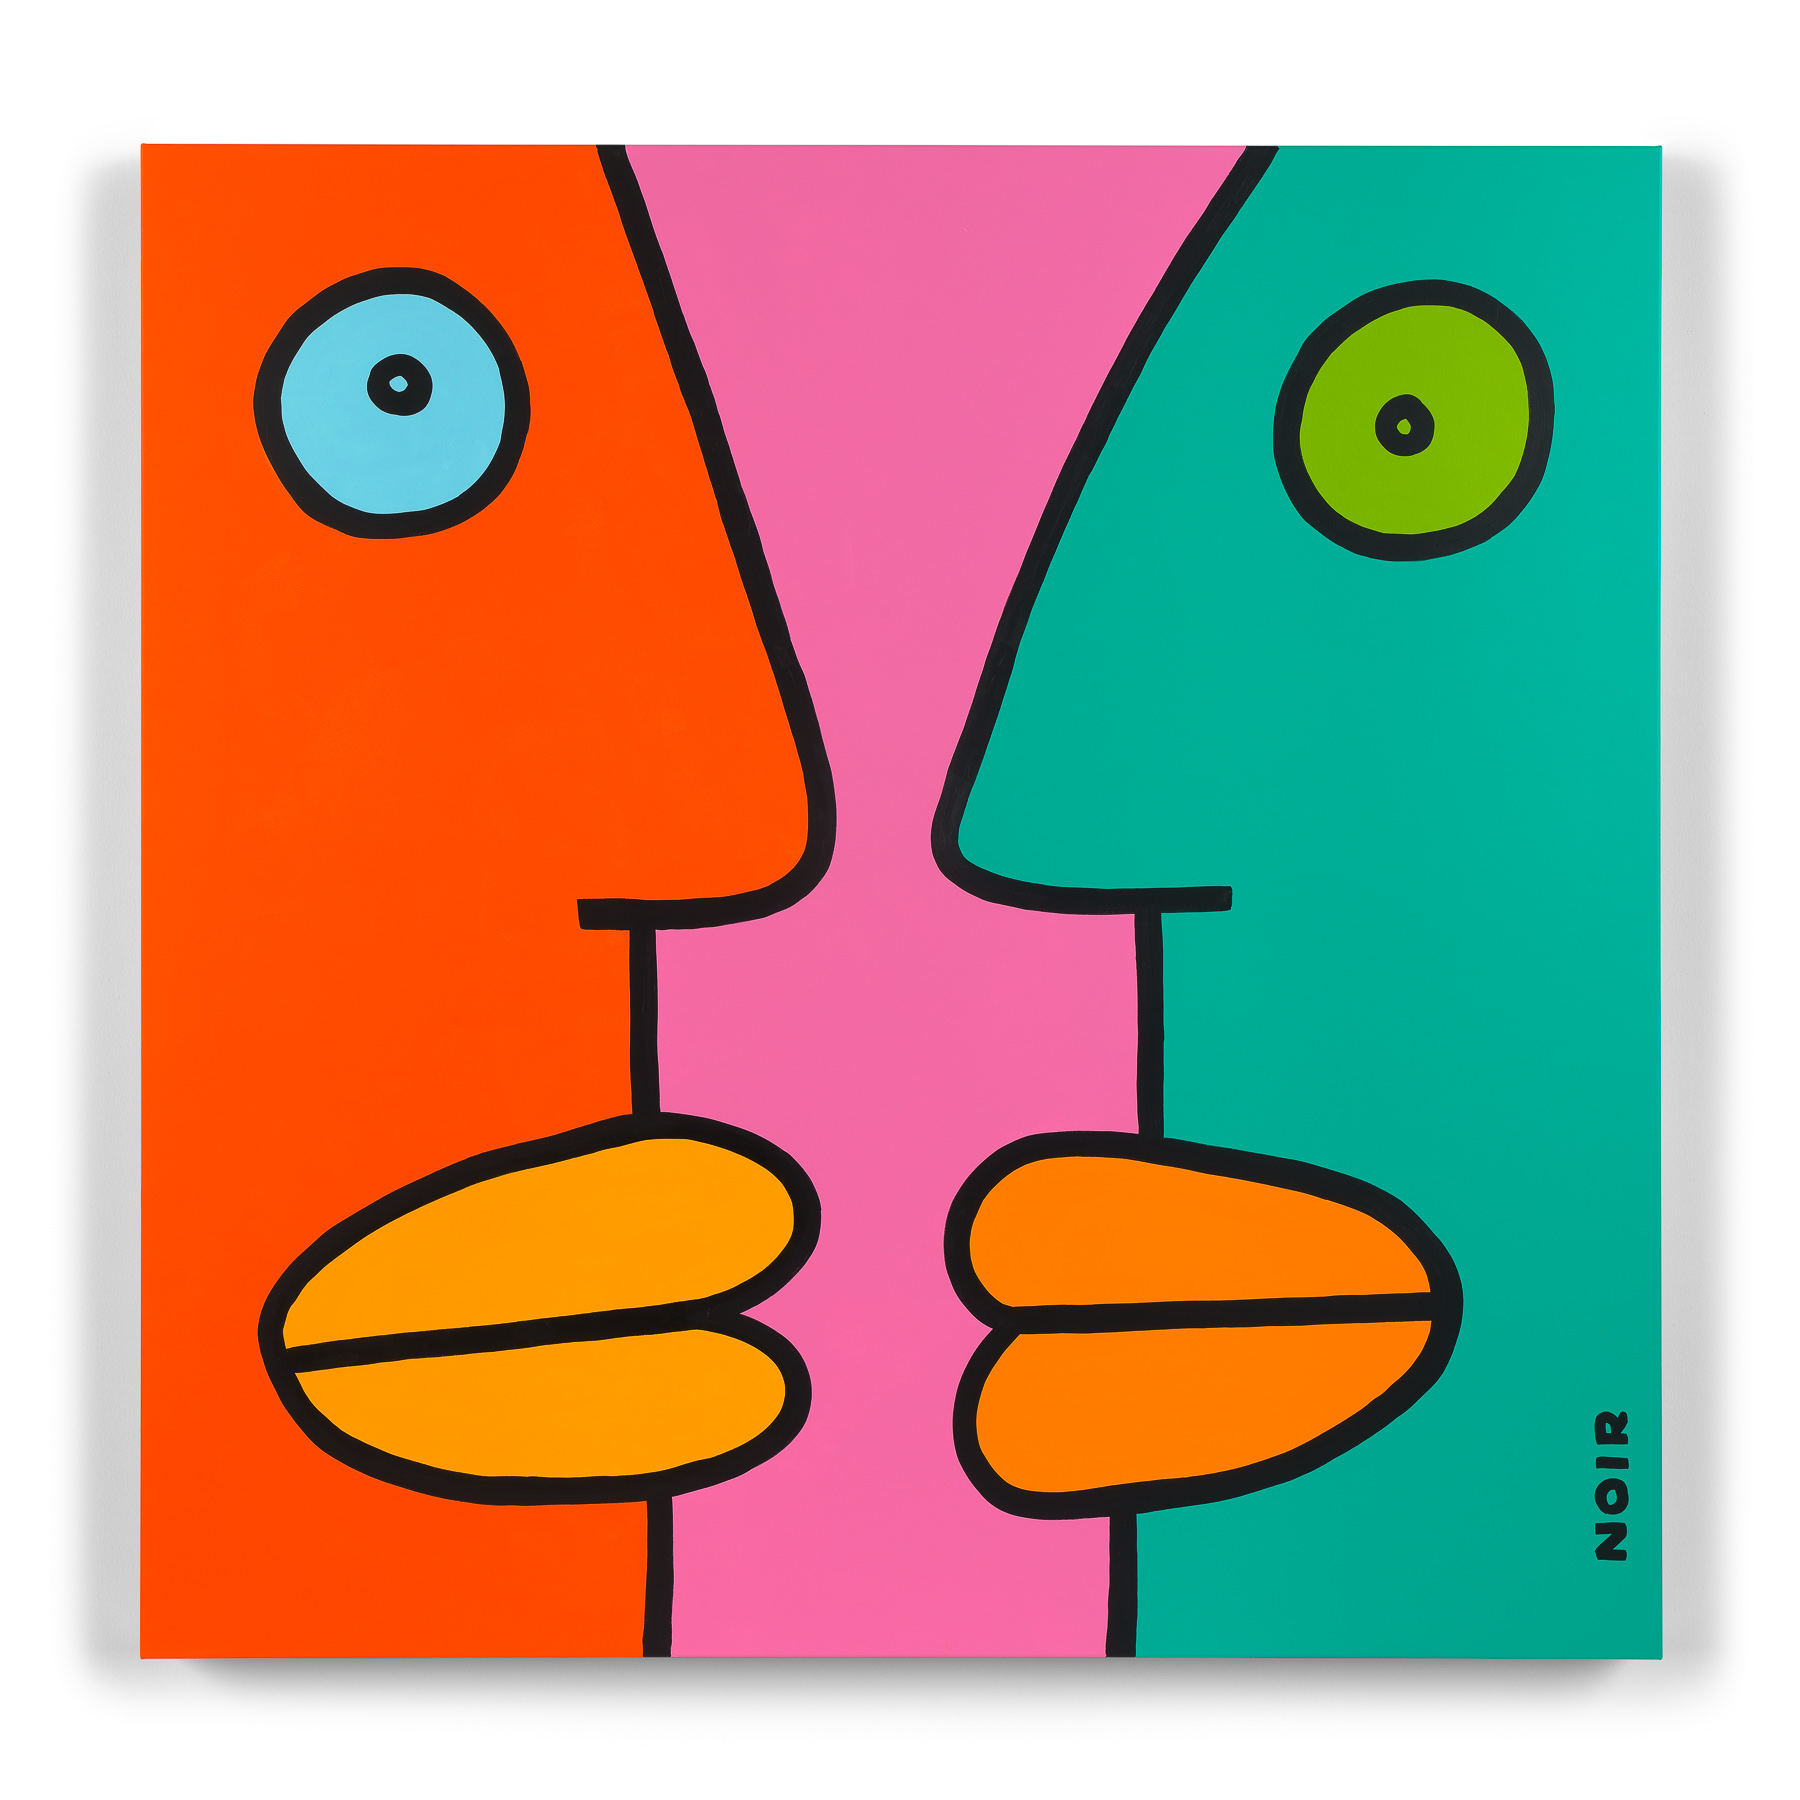 Thierry Noir - The Dialogue Returns in the Second Week After a Three Day Seminar (180cm by 180cm, 2023)